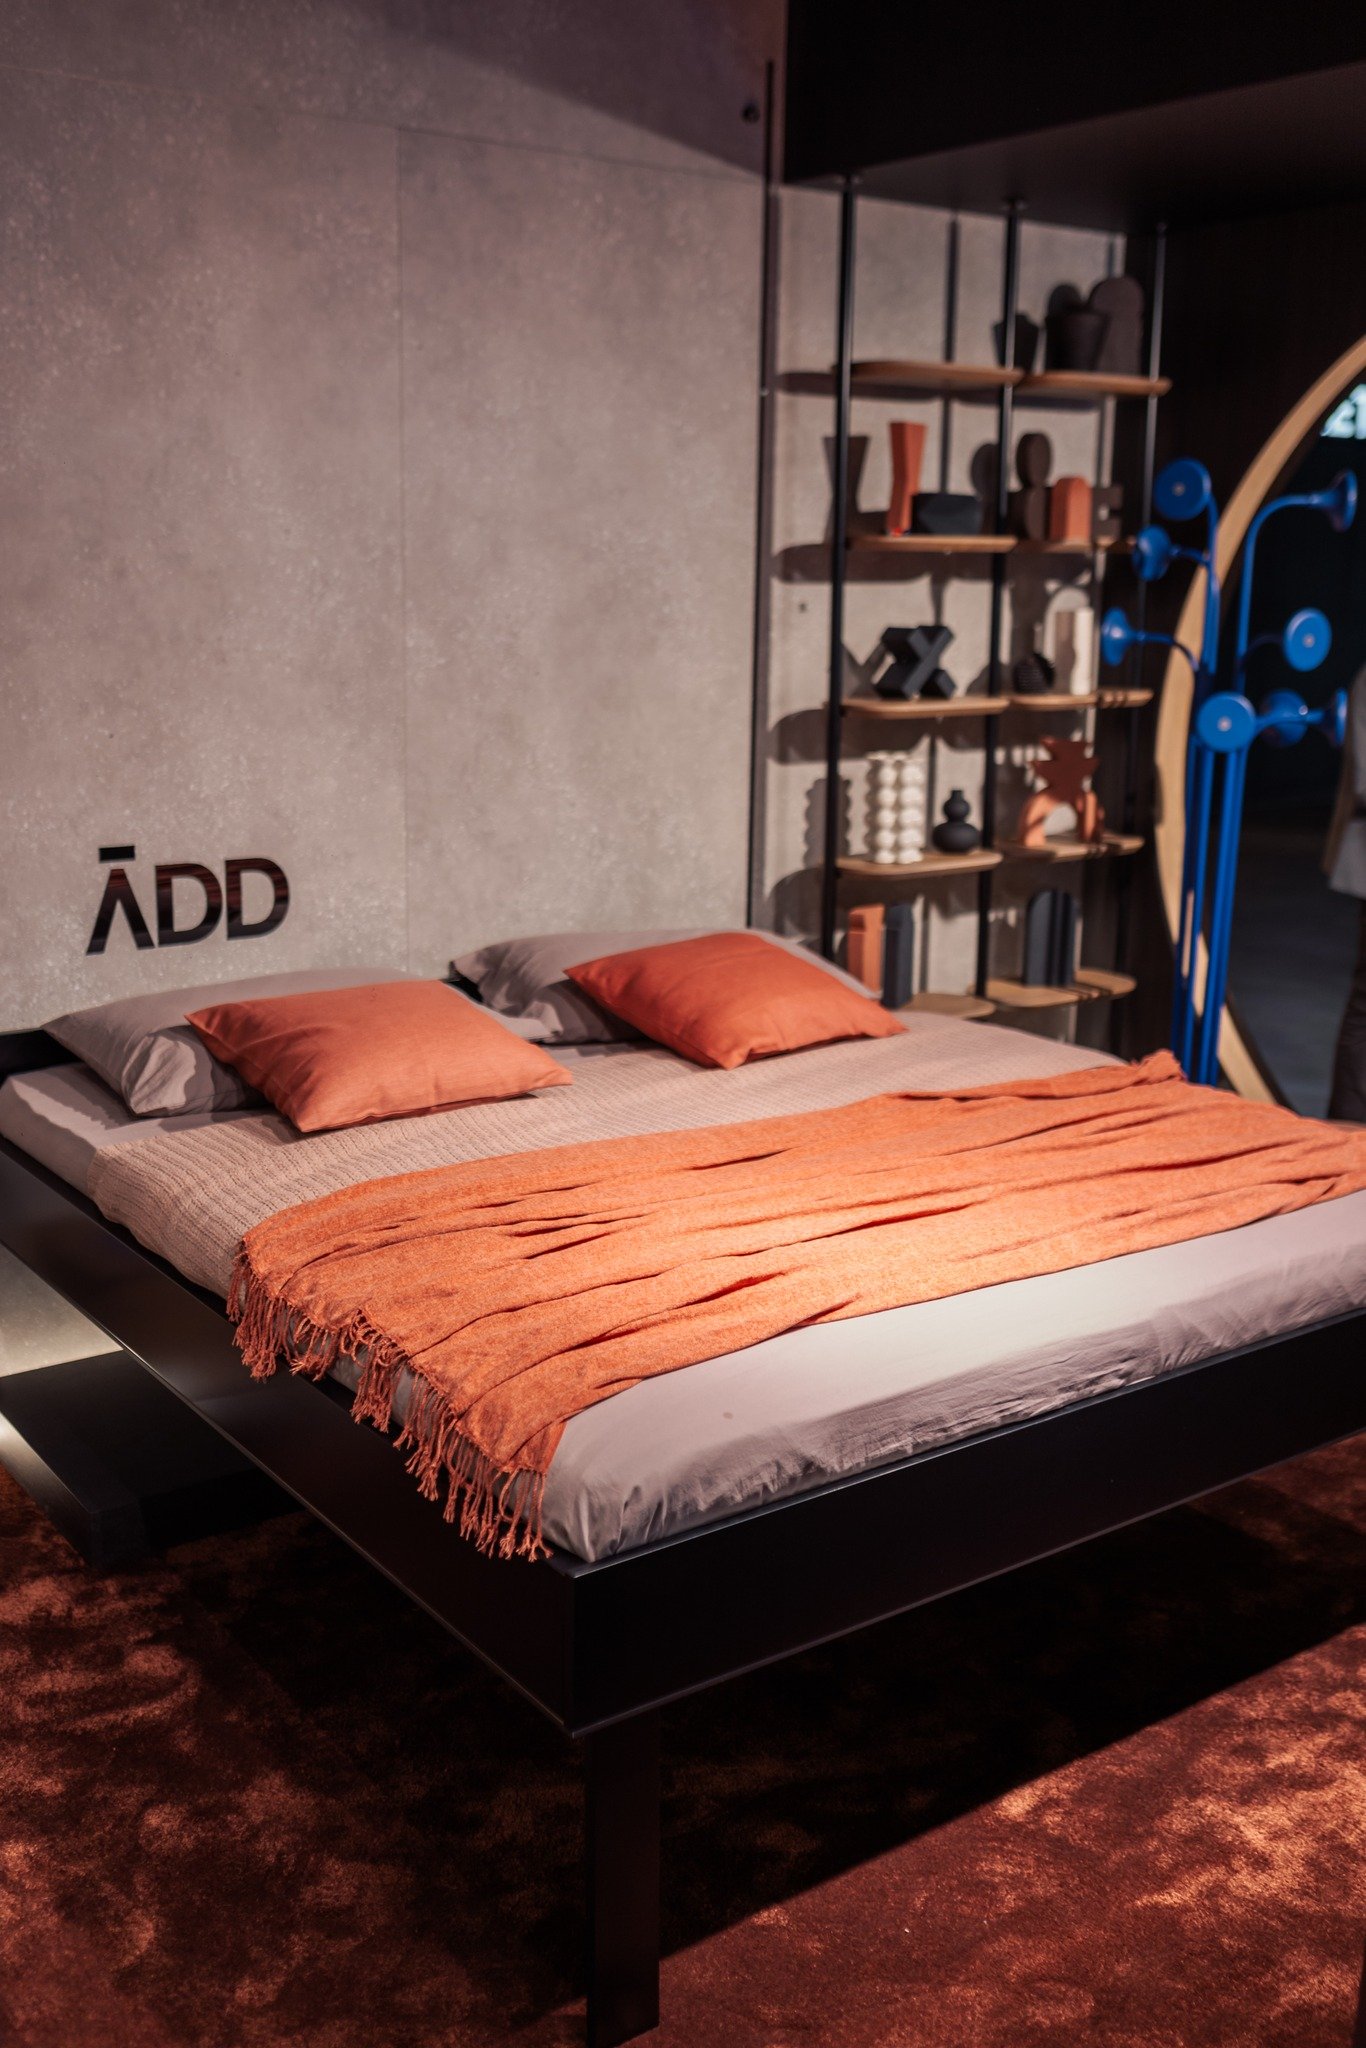 This is the perfect blend of rest and productivity, all in the same room. Sleep soundly and work efficiently in one innovative solution. Check out the +Comfort bed:
https://add-rest.com/add-comfort
#ADDrest